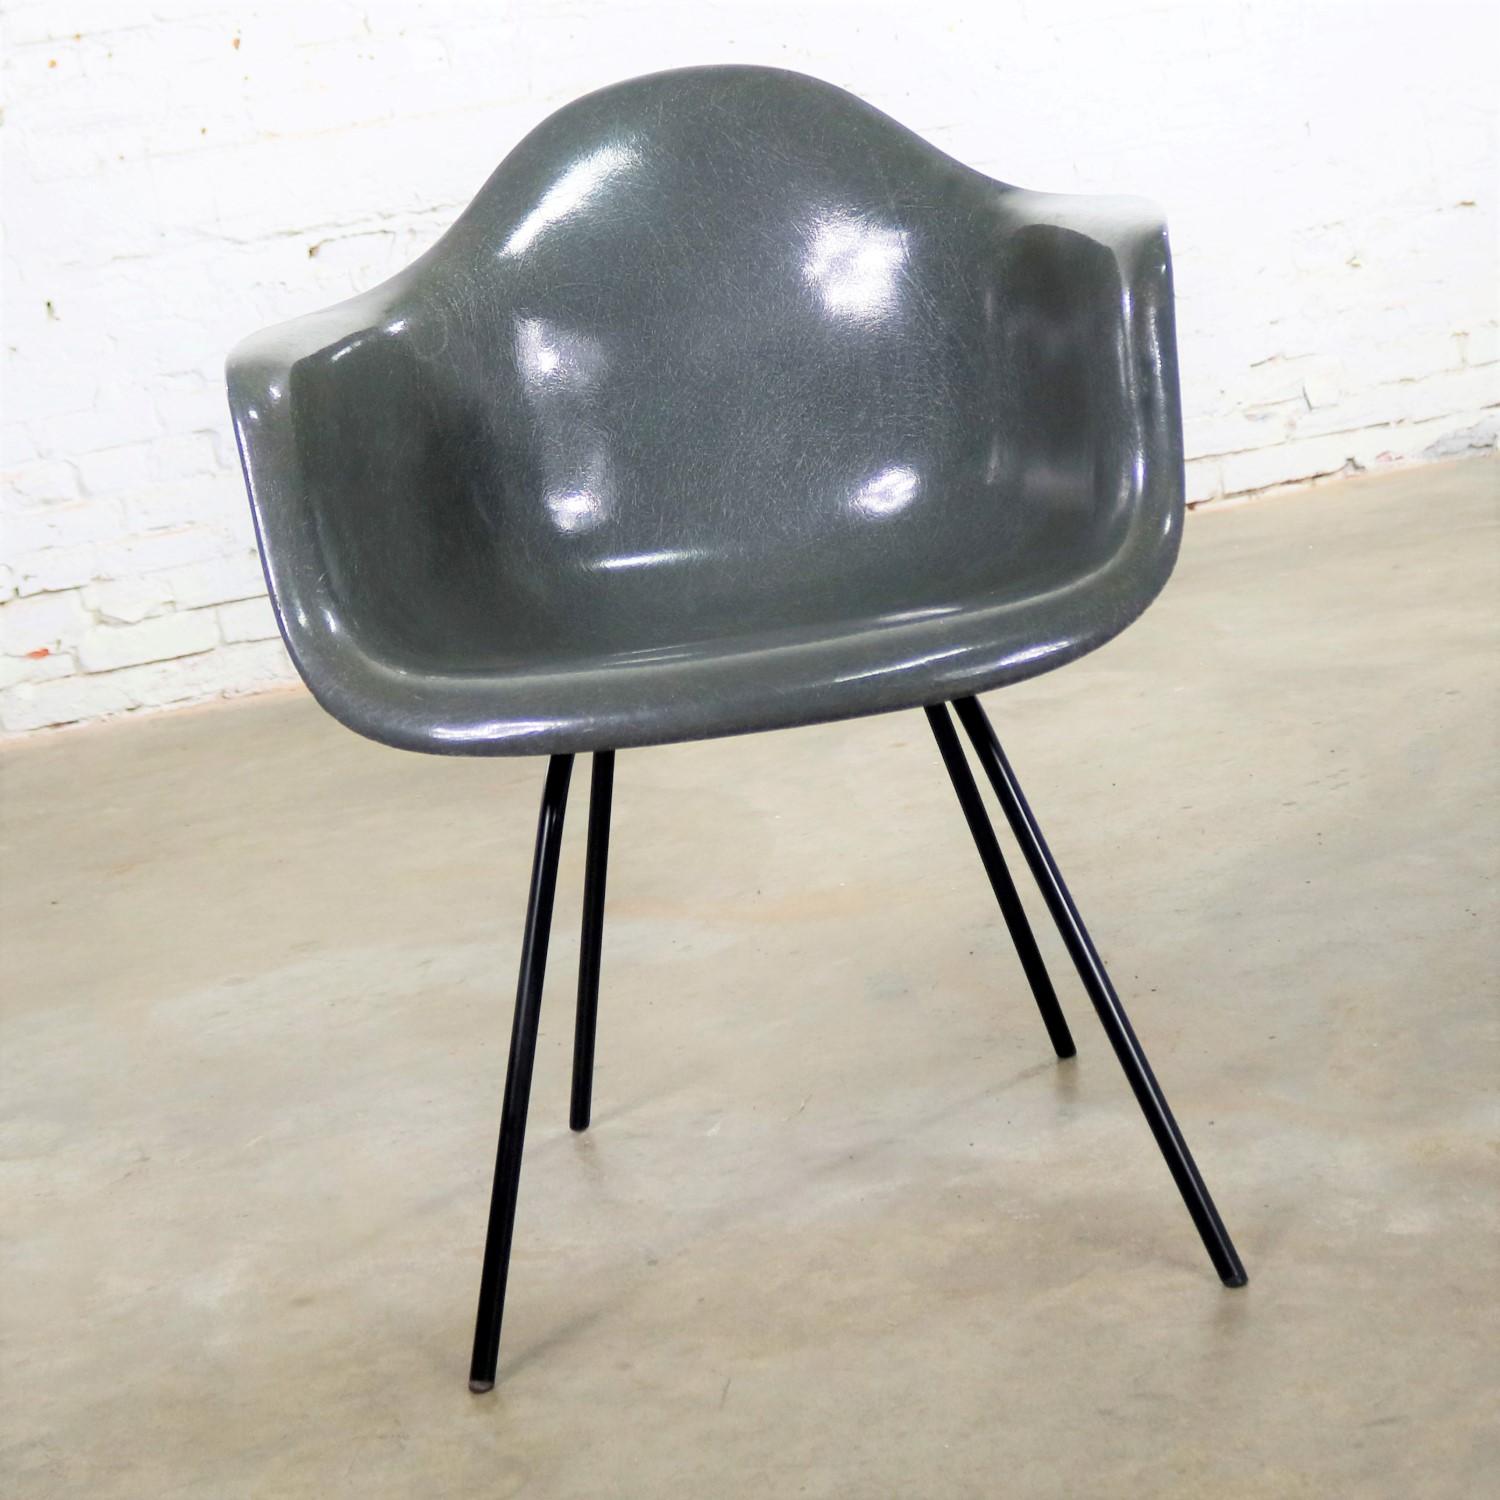 Awesome example of the Charles and Ray Eames DAX fiberglass arm shell chair for Herman Miller. It is in elephant hide gray with a black H base and unusual glide feet. It retains a paper label but no other markings. And is in wonderful vintage